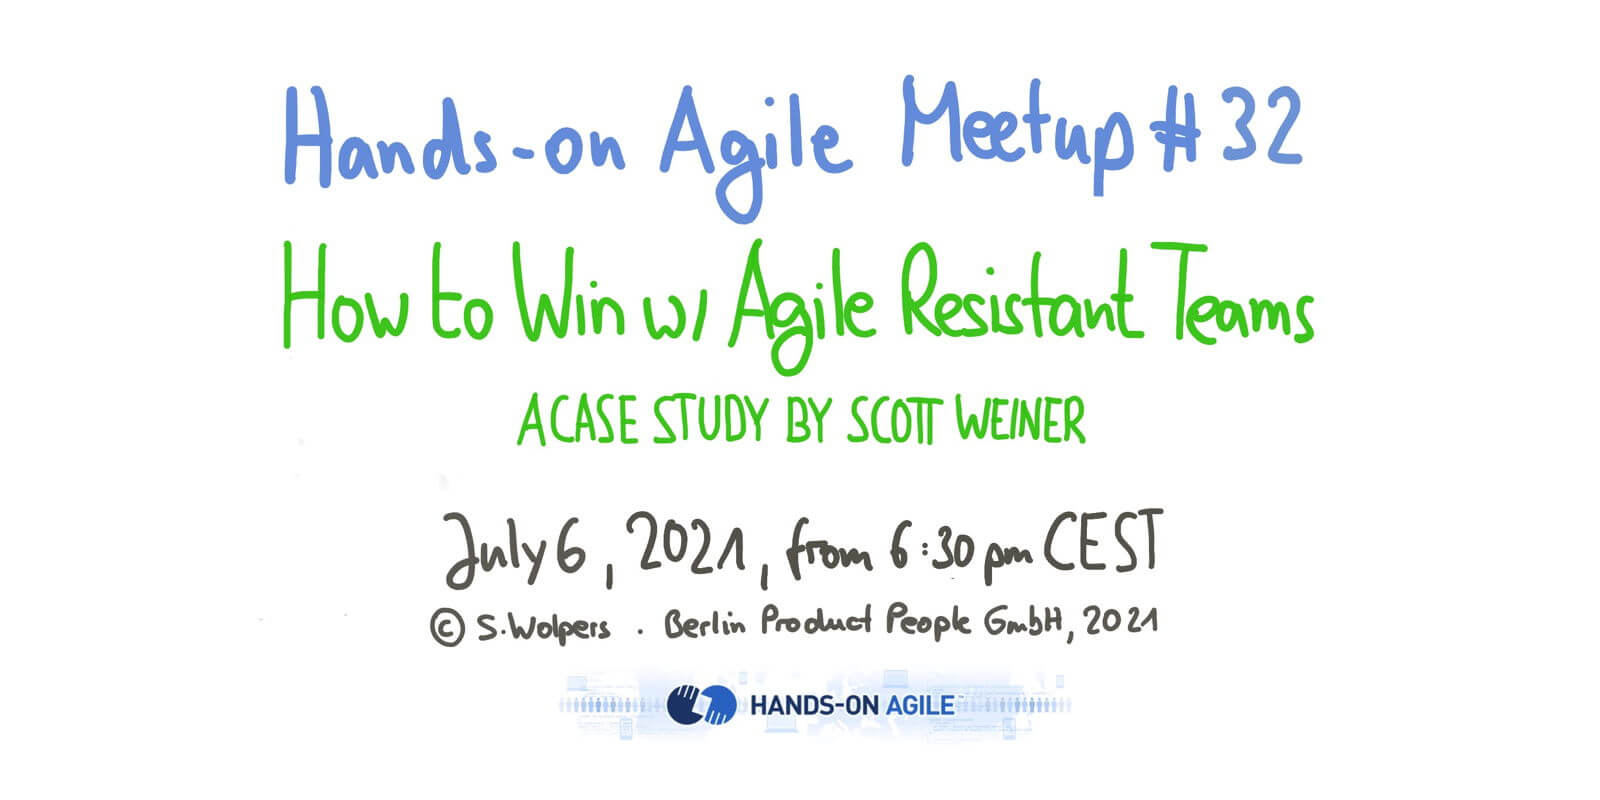 July 6, 2021: Hands-on Agile #32: How to Win with Agile Resistant Teams—Scott Weiner